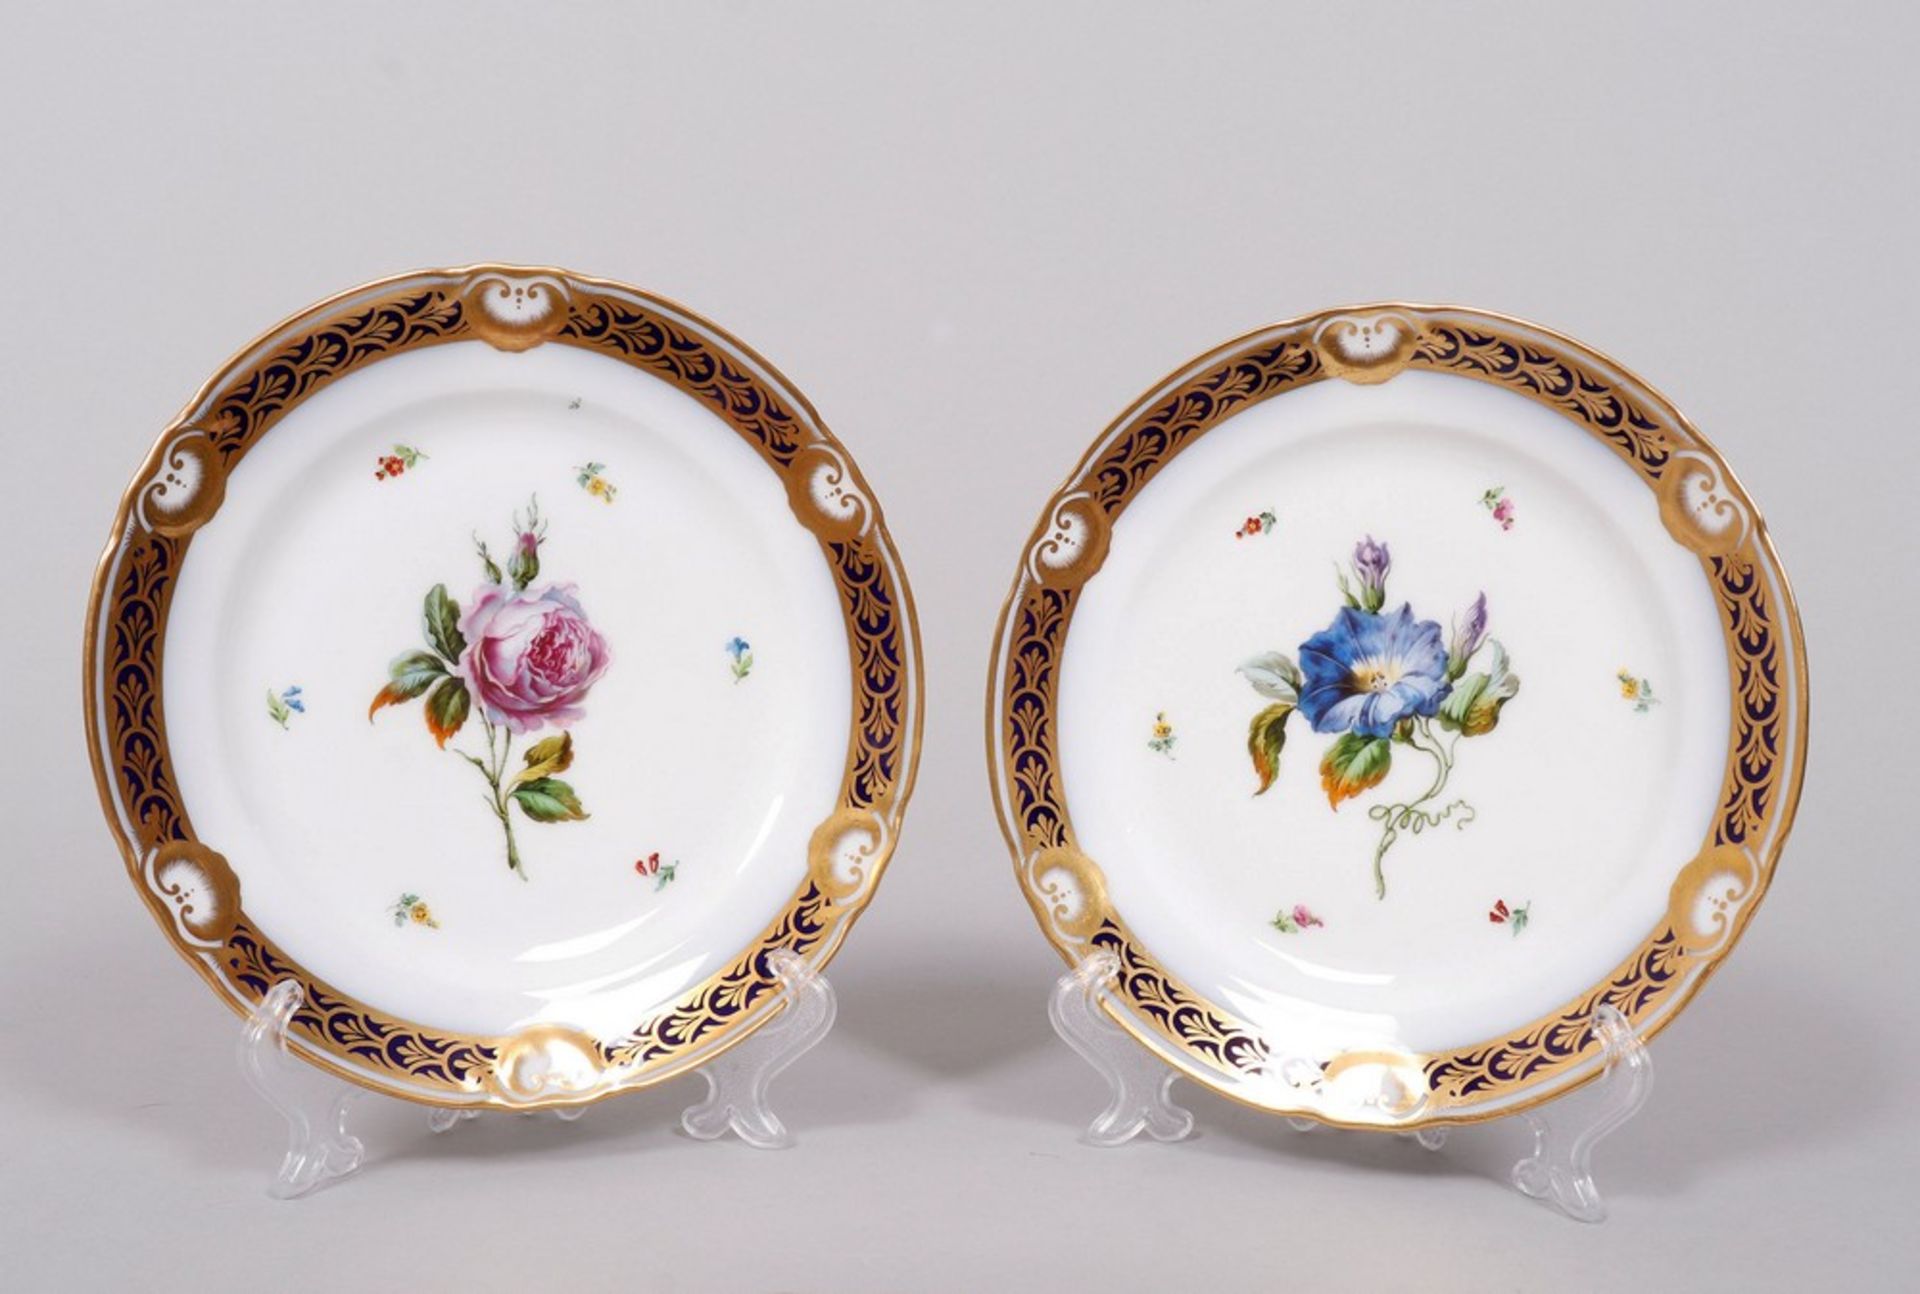 11 cake plates, Imperial Vienna, c. 1808 - Image 3 of 12